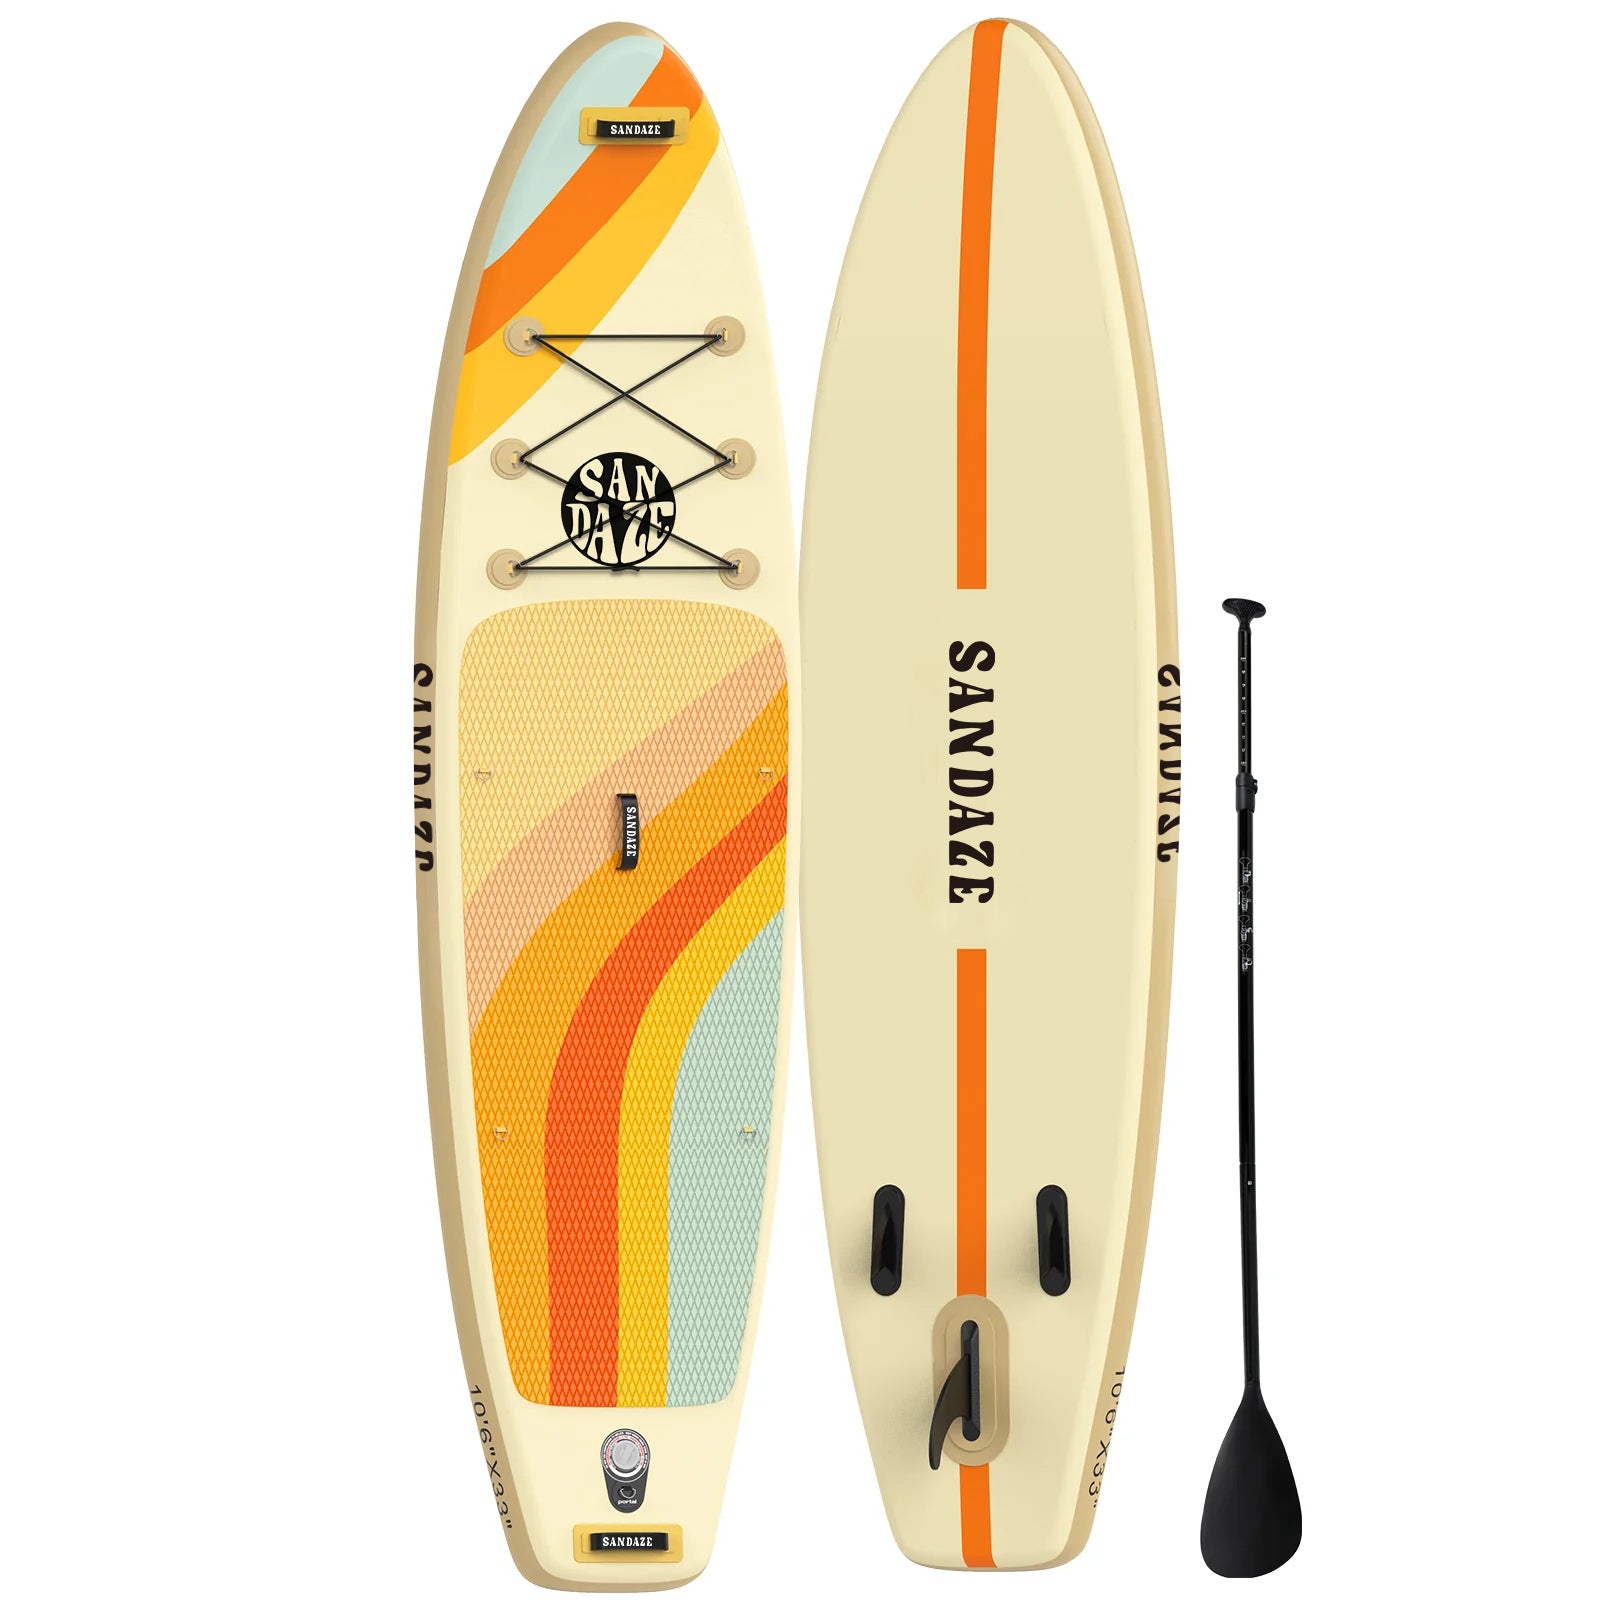 SANDAZE Inflatable Stand Up Paddle Board